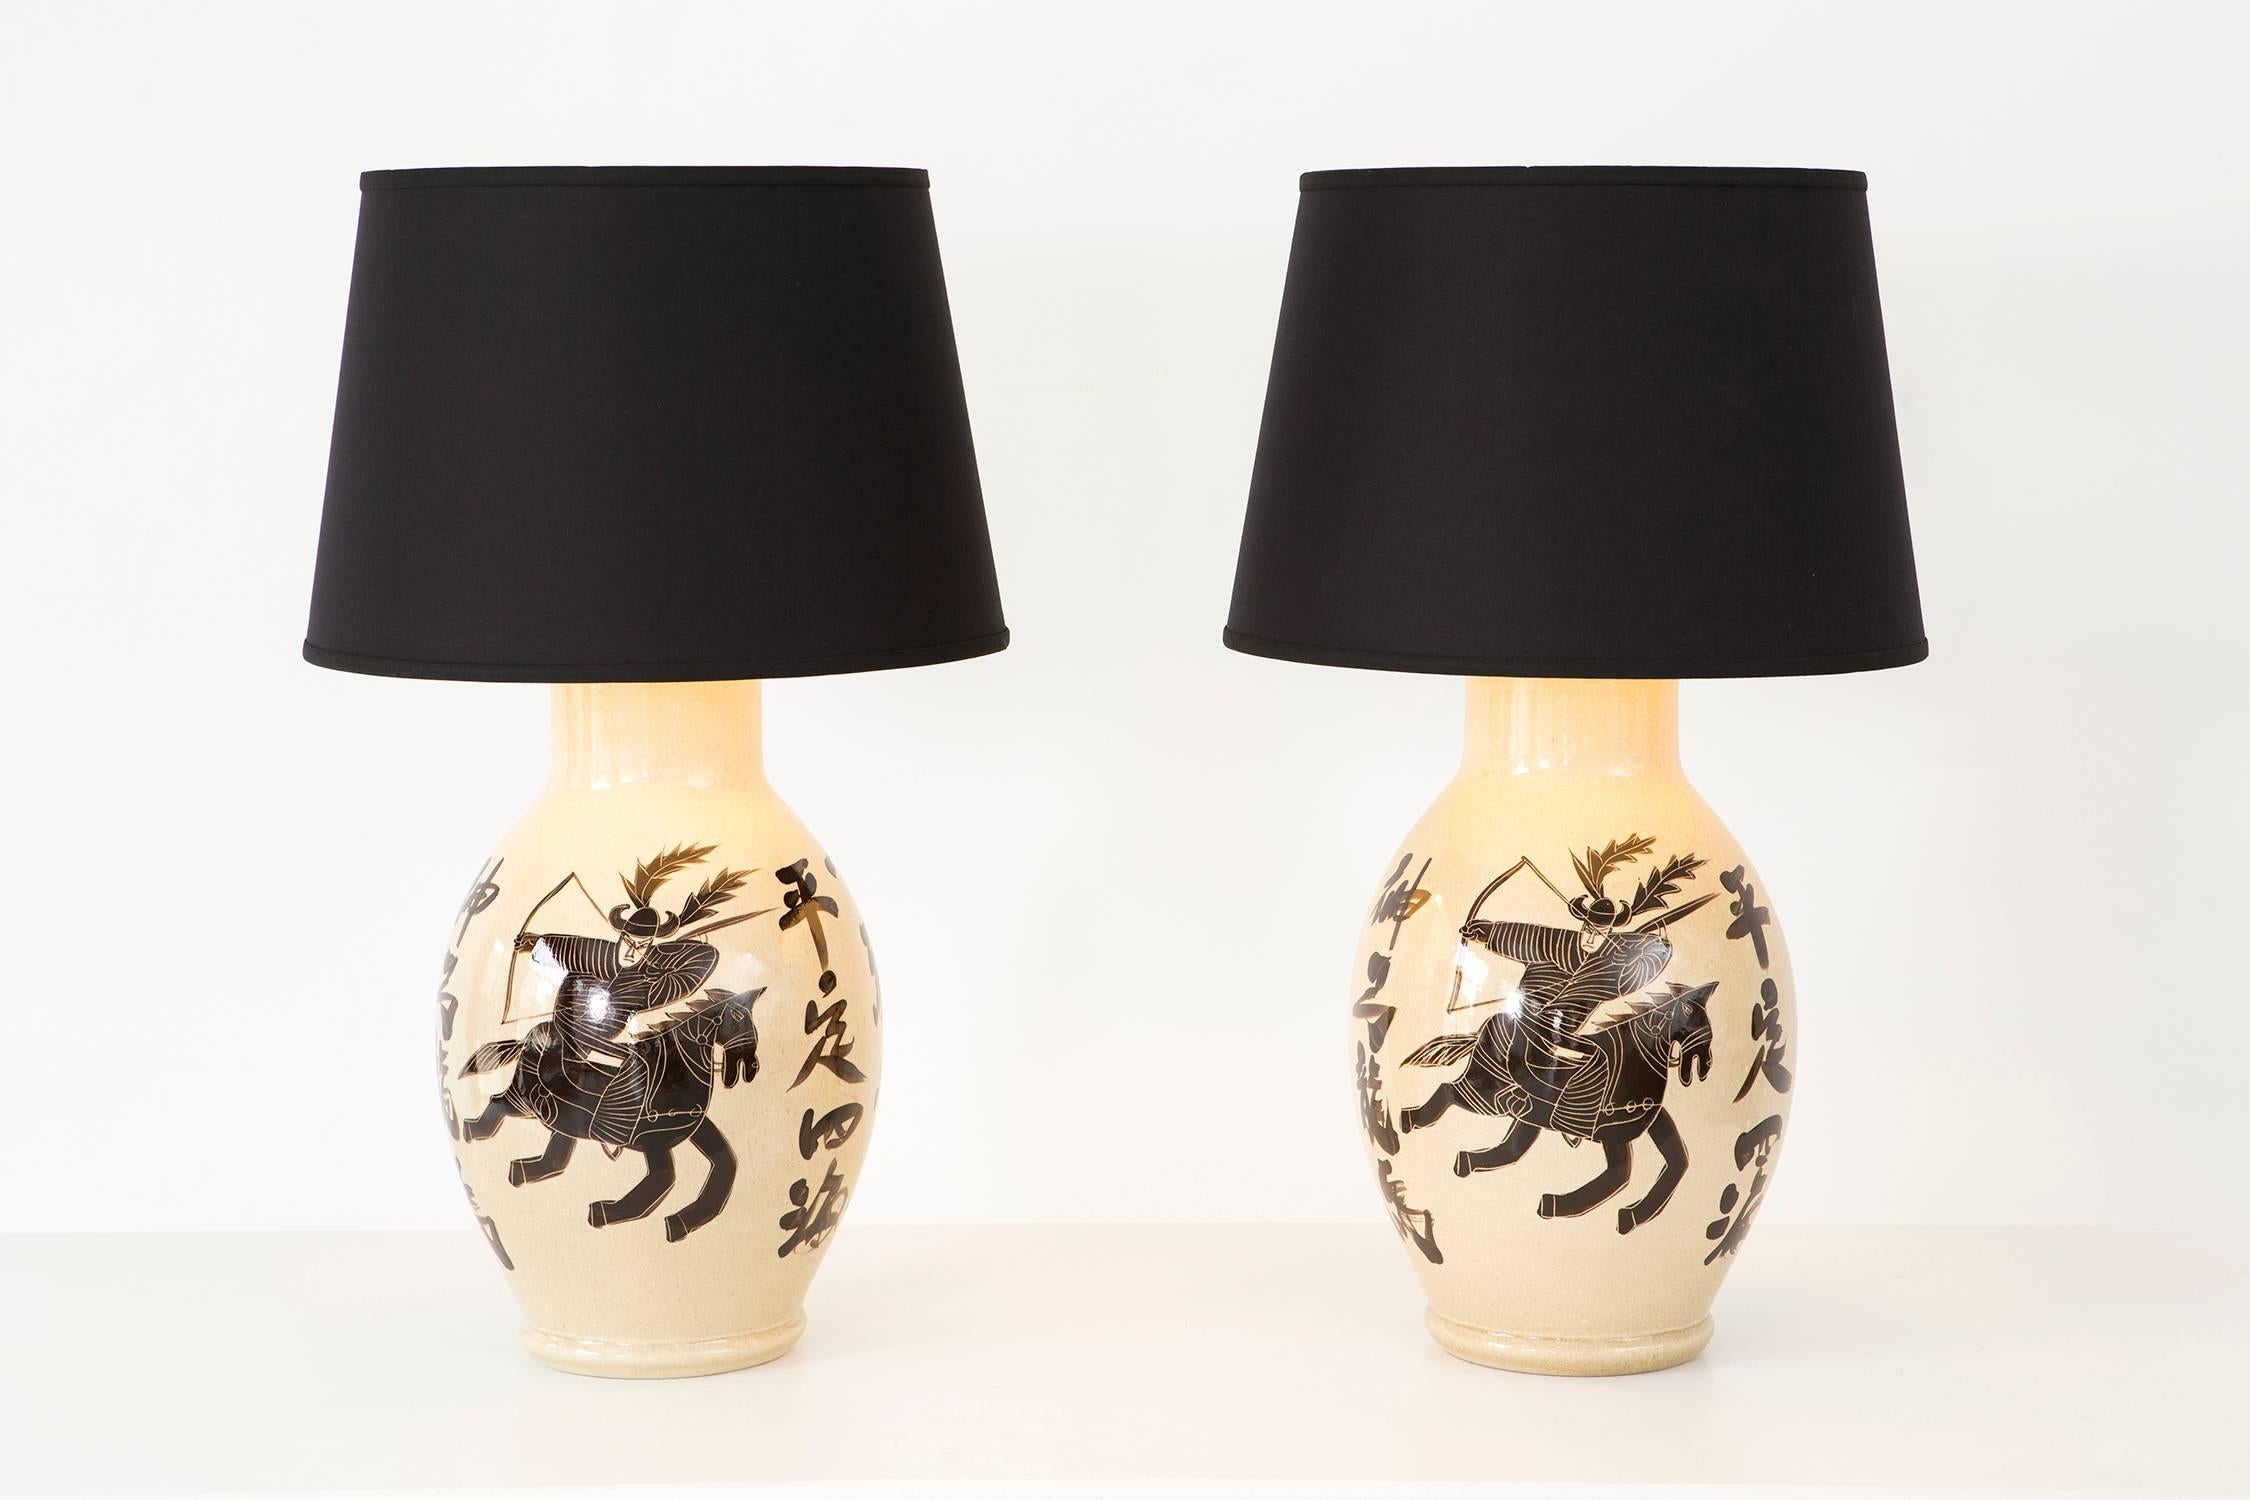 Set of chinoiserie lamps

Designer unknown

circa 1960s

Ceramic bases and linen shades

Measures: 32 ¾” H x 19 ?” W x 19 ?” D.

new linen drum shades

sold as a set